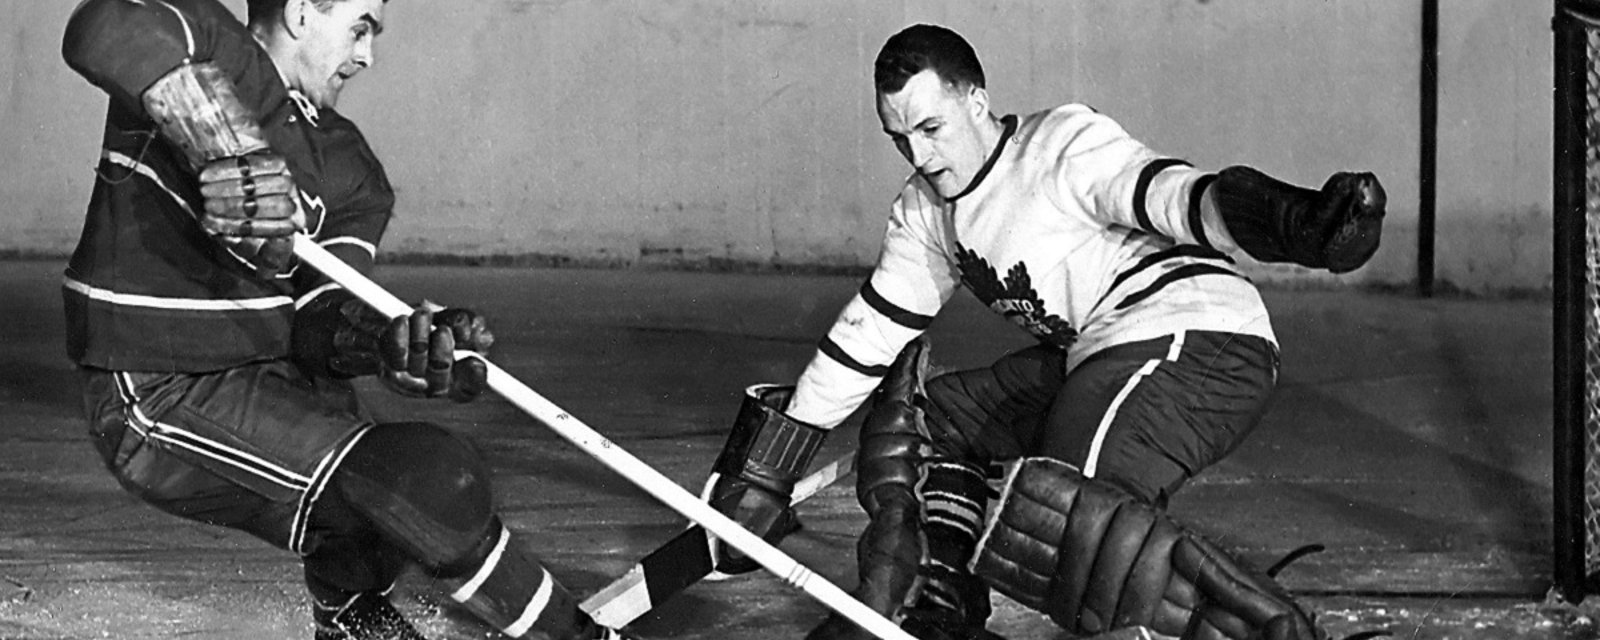 NHL leegends Gordie Howe, Rocket Richard, will have their names removed from the Cup.